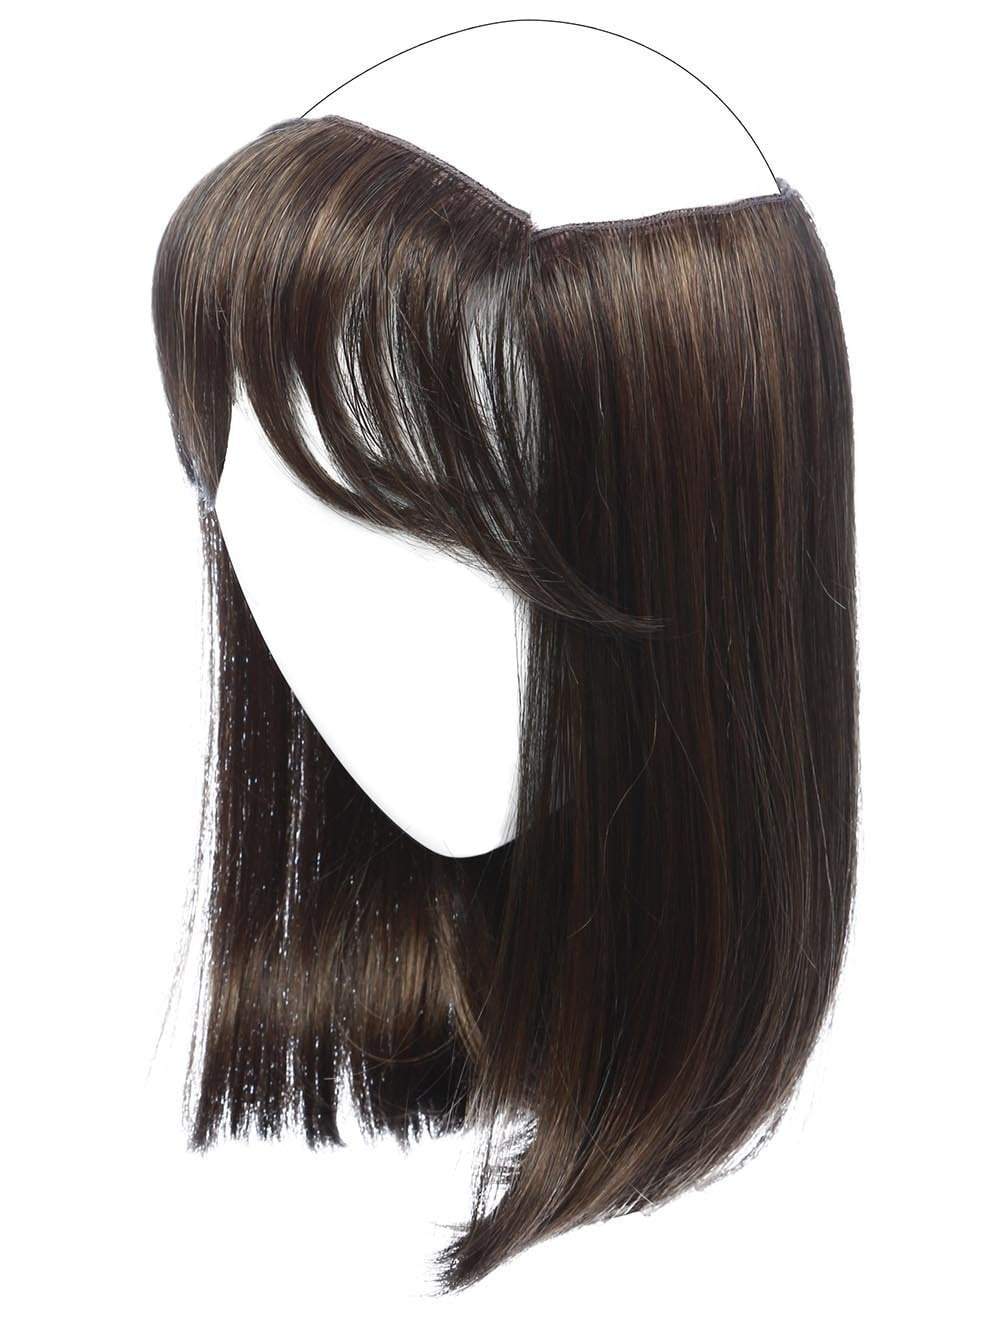 Detachable Bang: changes the look and adds coverage at the front